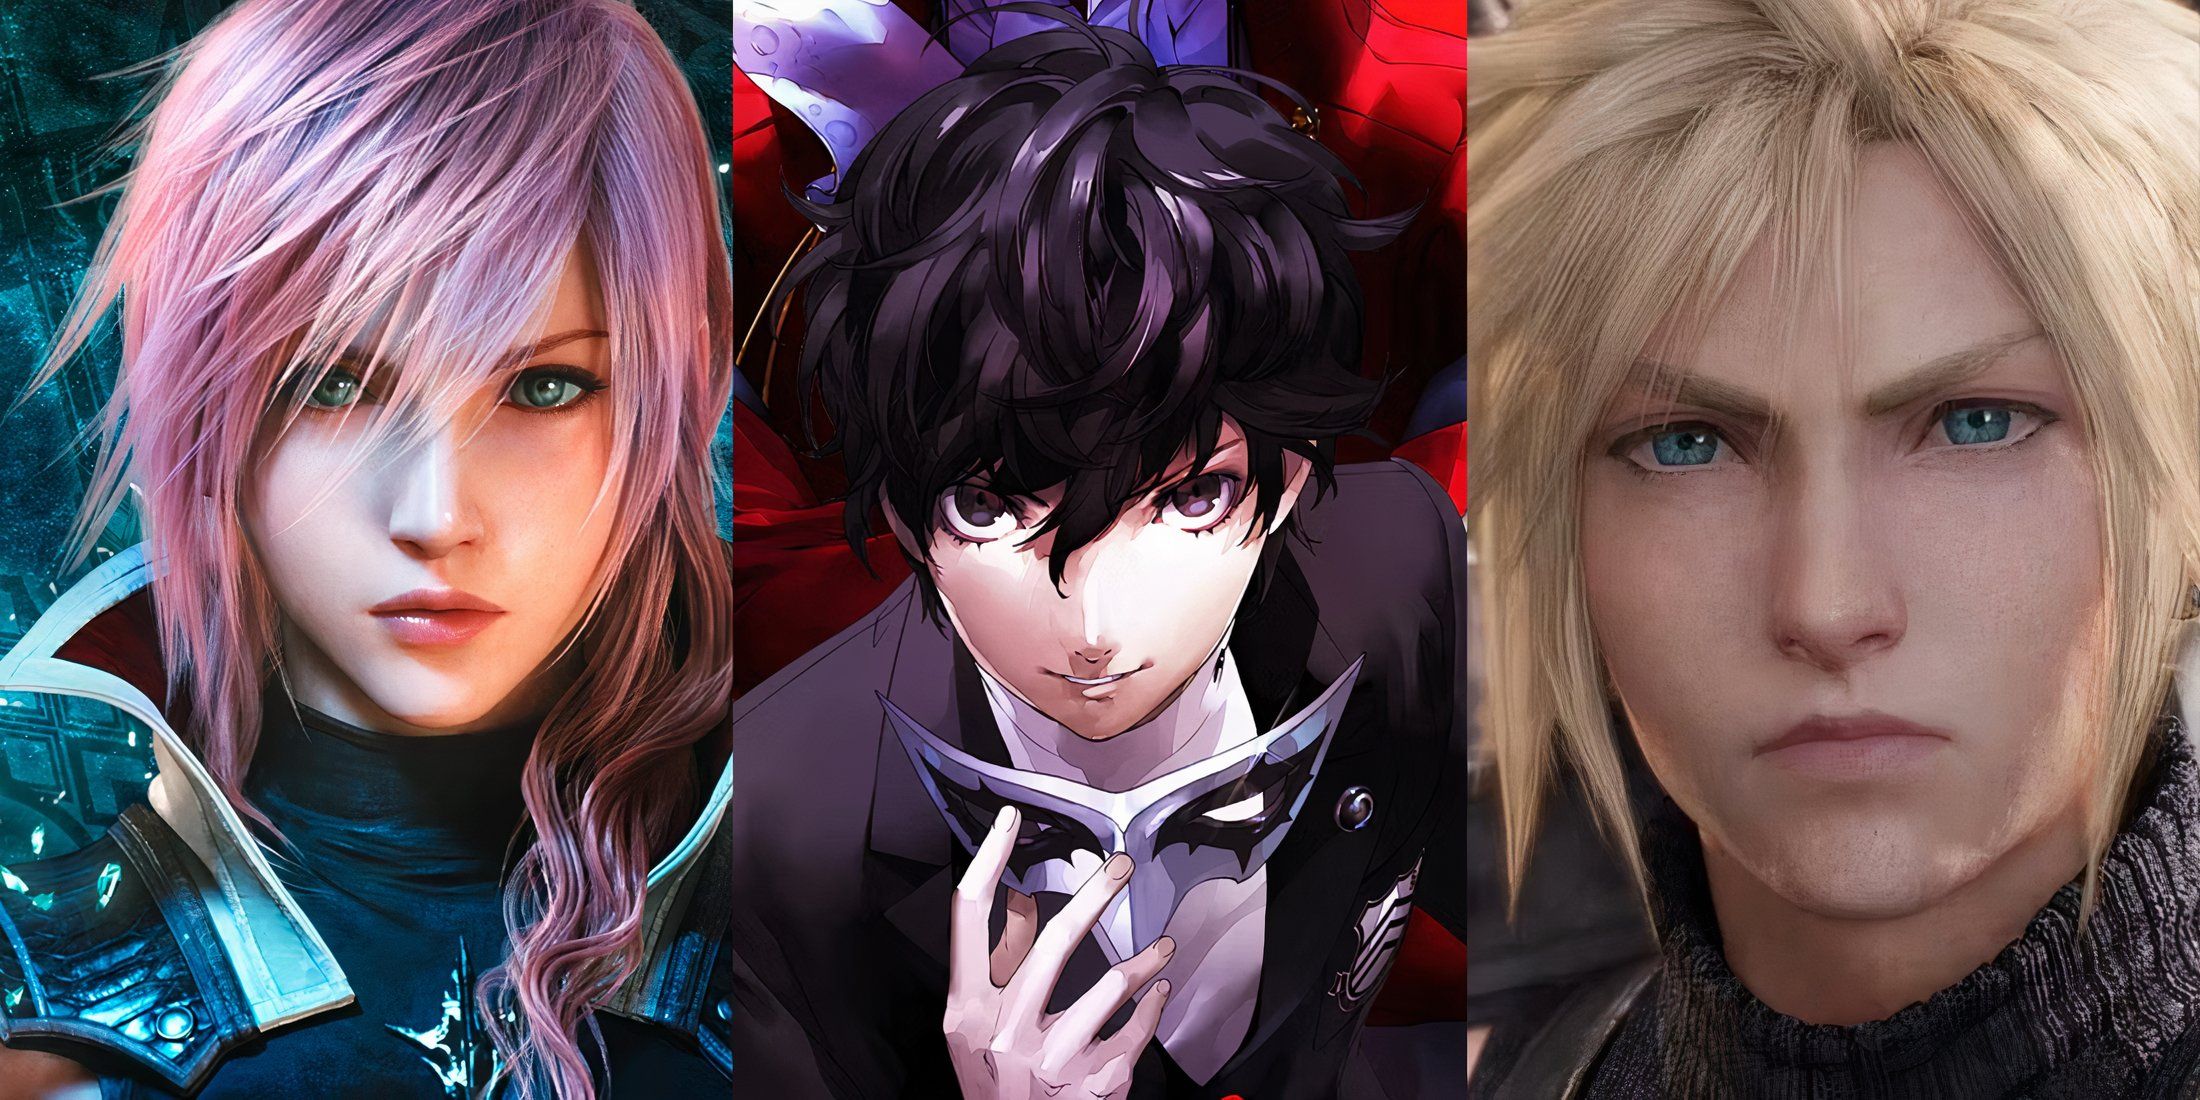 Lightning, Joker and Cloud- protagonists from linear RPG games with little exploration